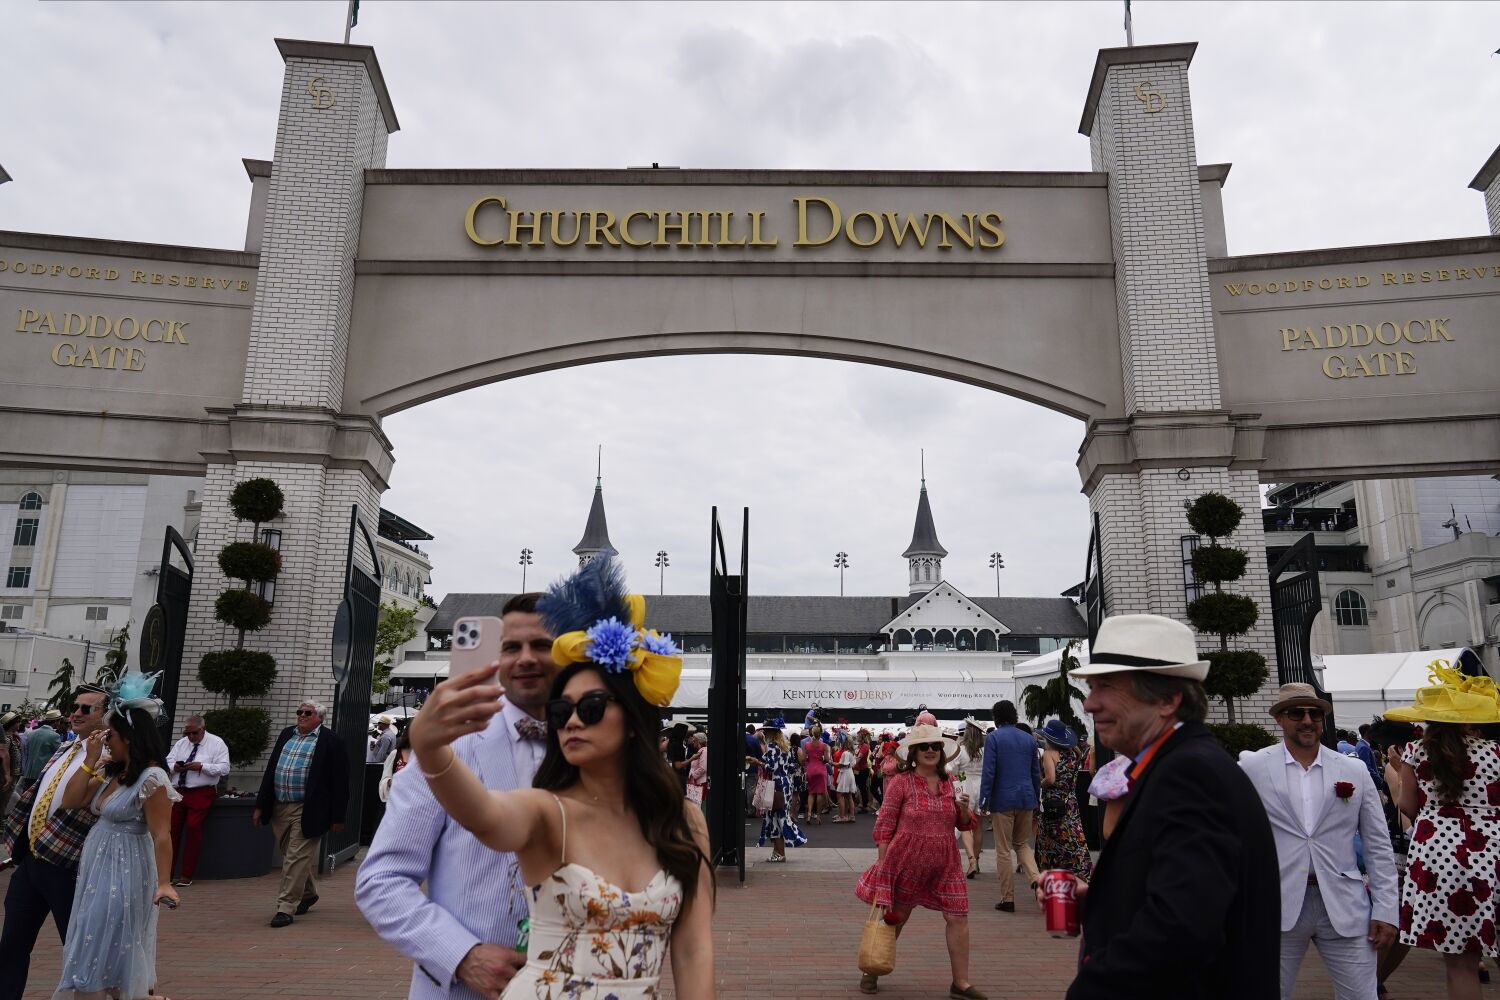 Churchill Downs moves race meet to Ellis Park in wake of 12 horse deaths